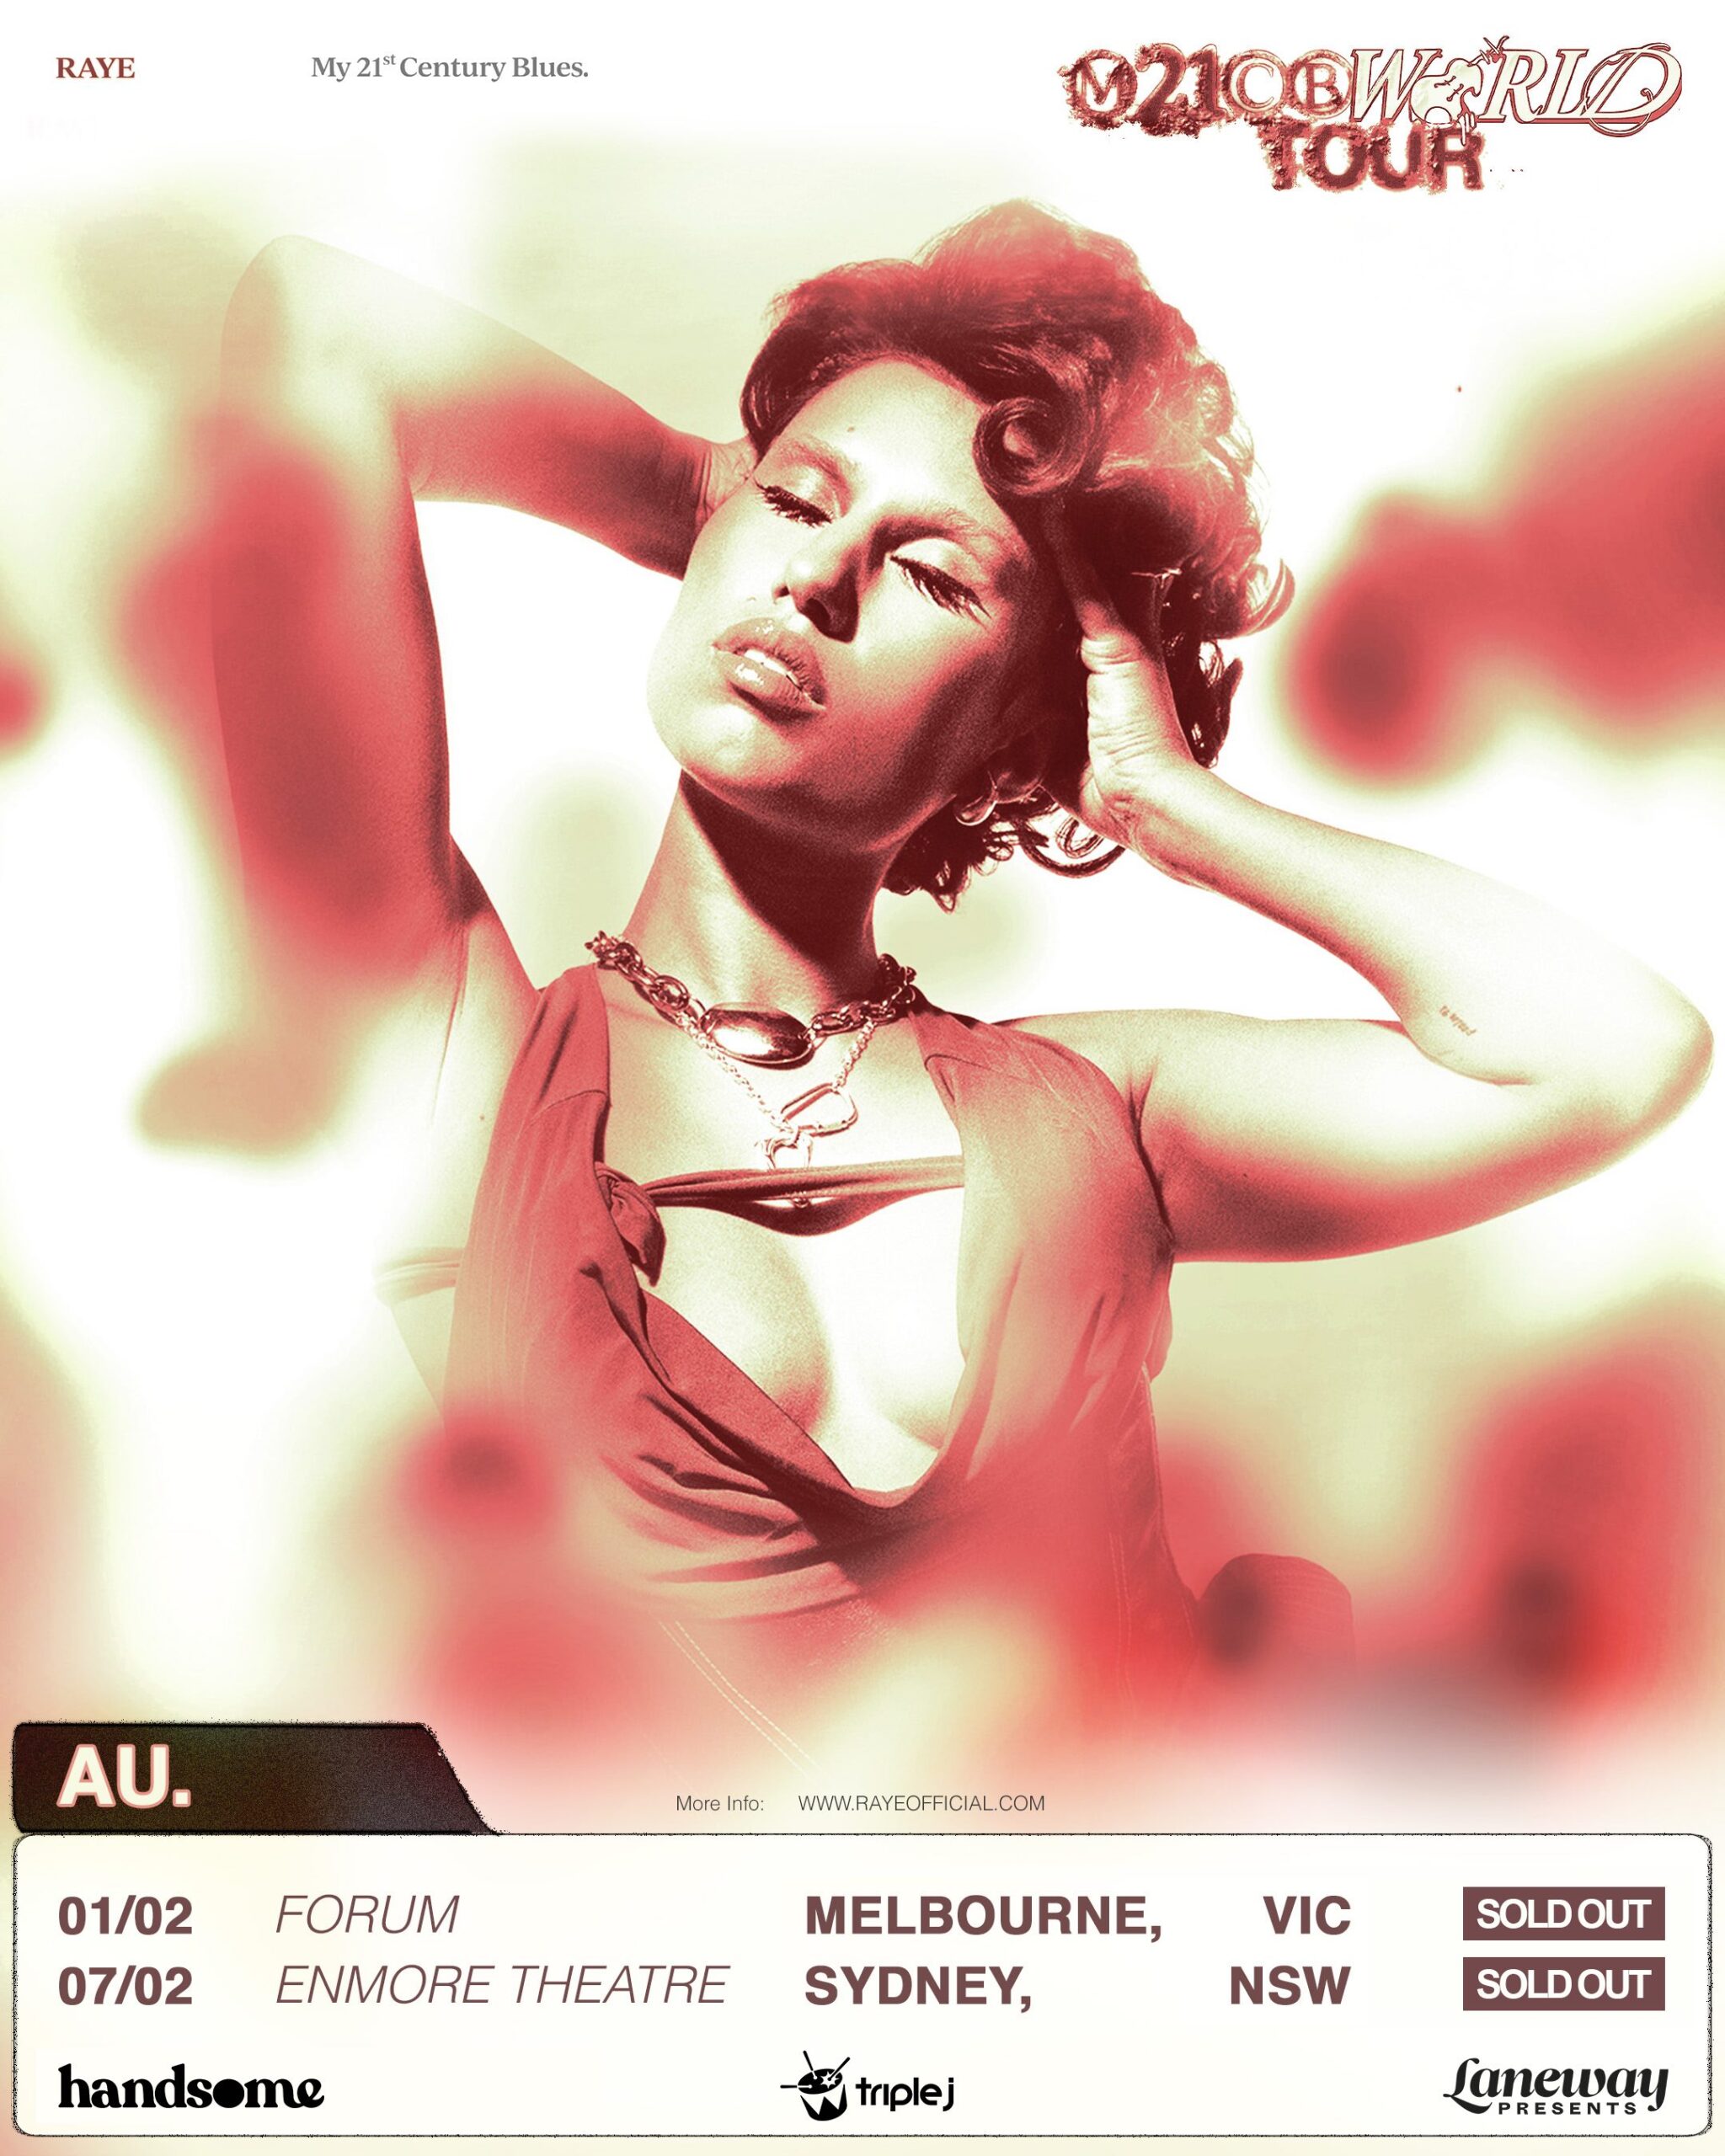 https://www.handsometours.com/wp-content/uploads/2023/06/RAYE-AU-4x5-MEL-SYD-Sold-Out-scaled.jpg